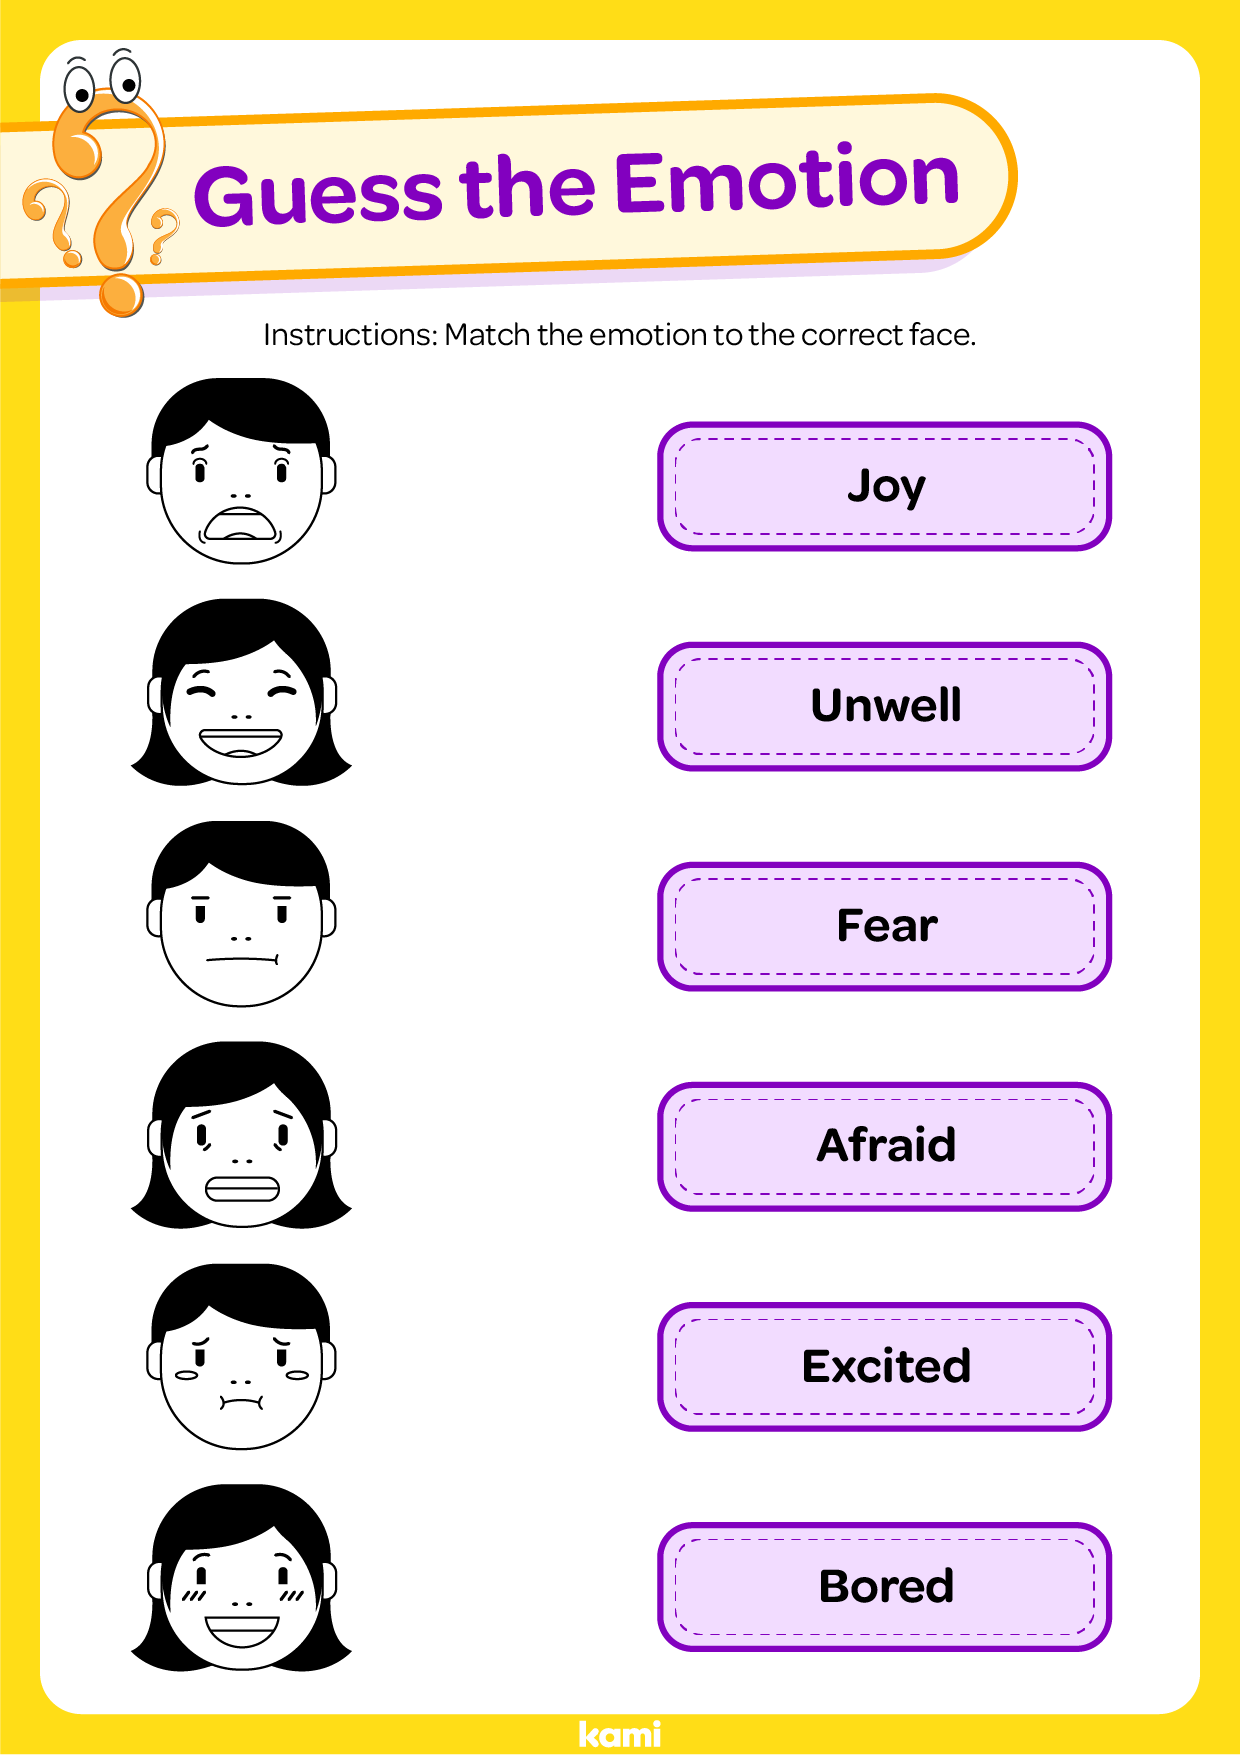 A guess the emotion worksheet for young learners with a two page exercise